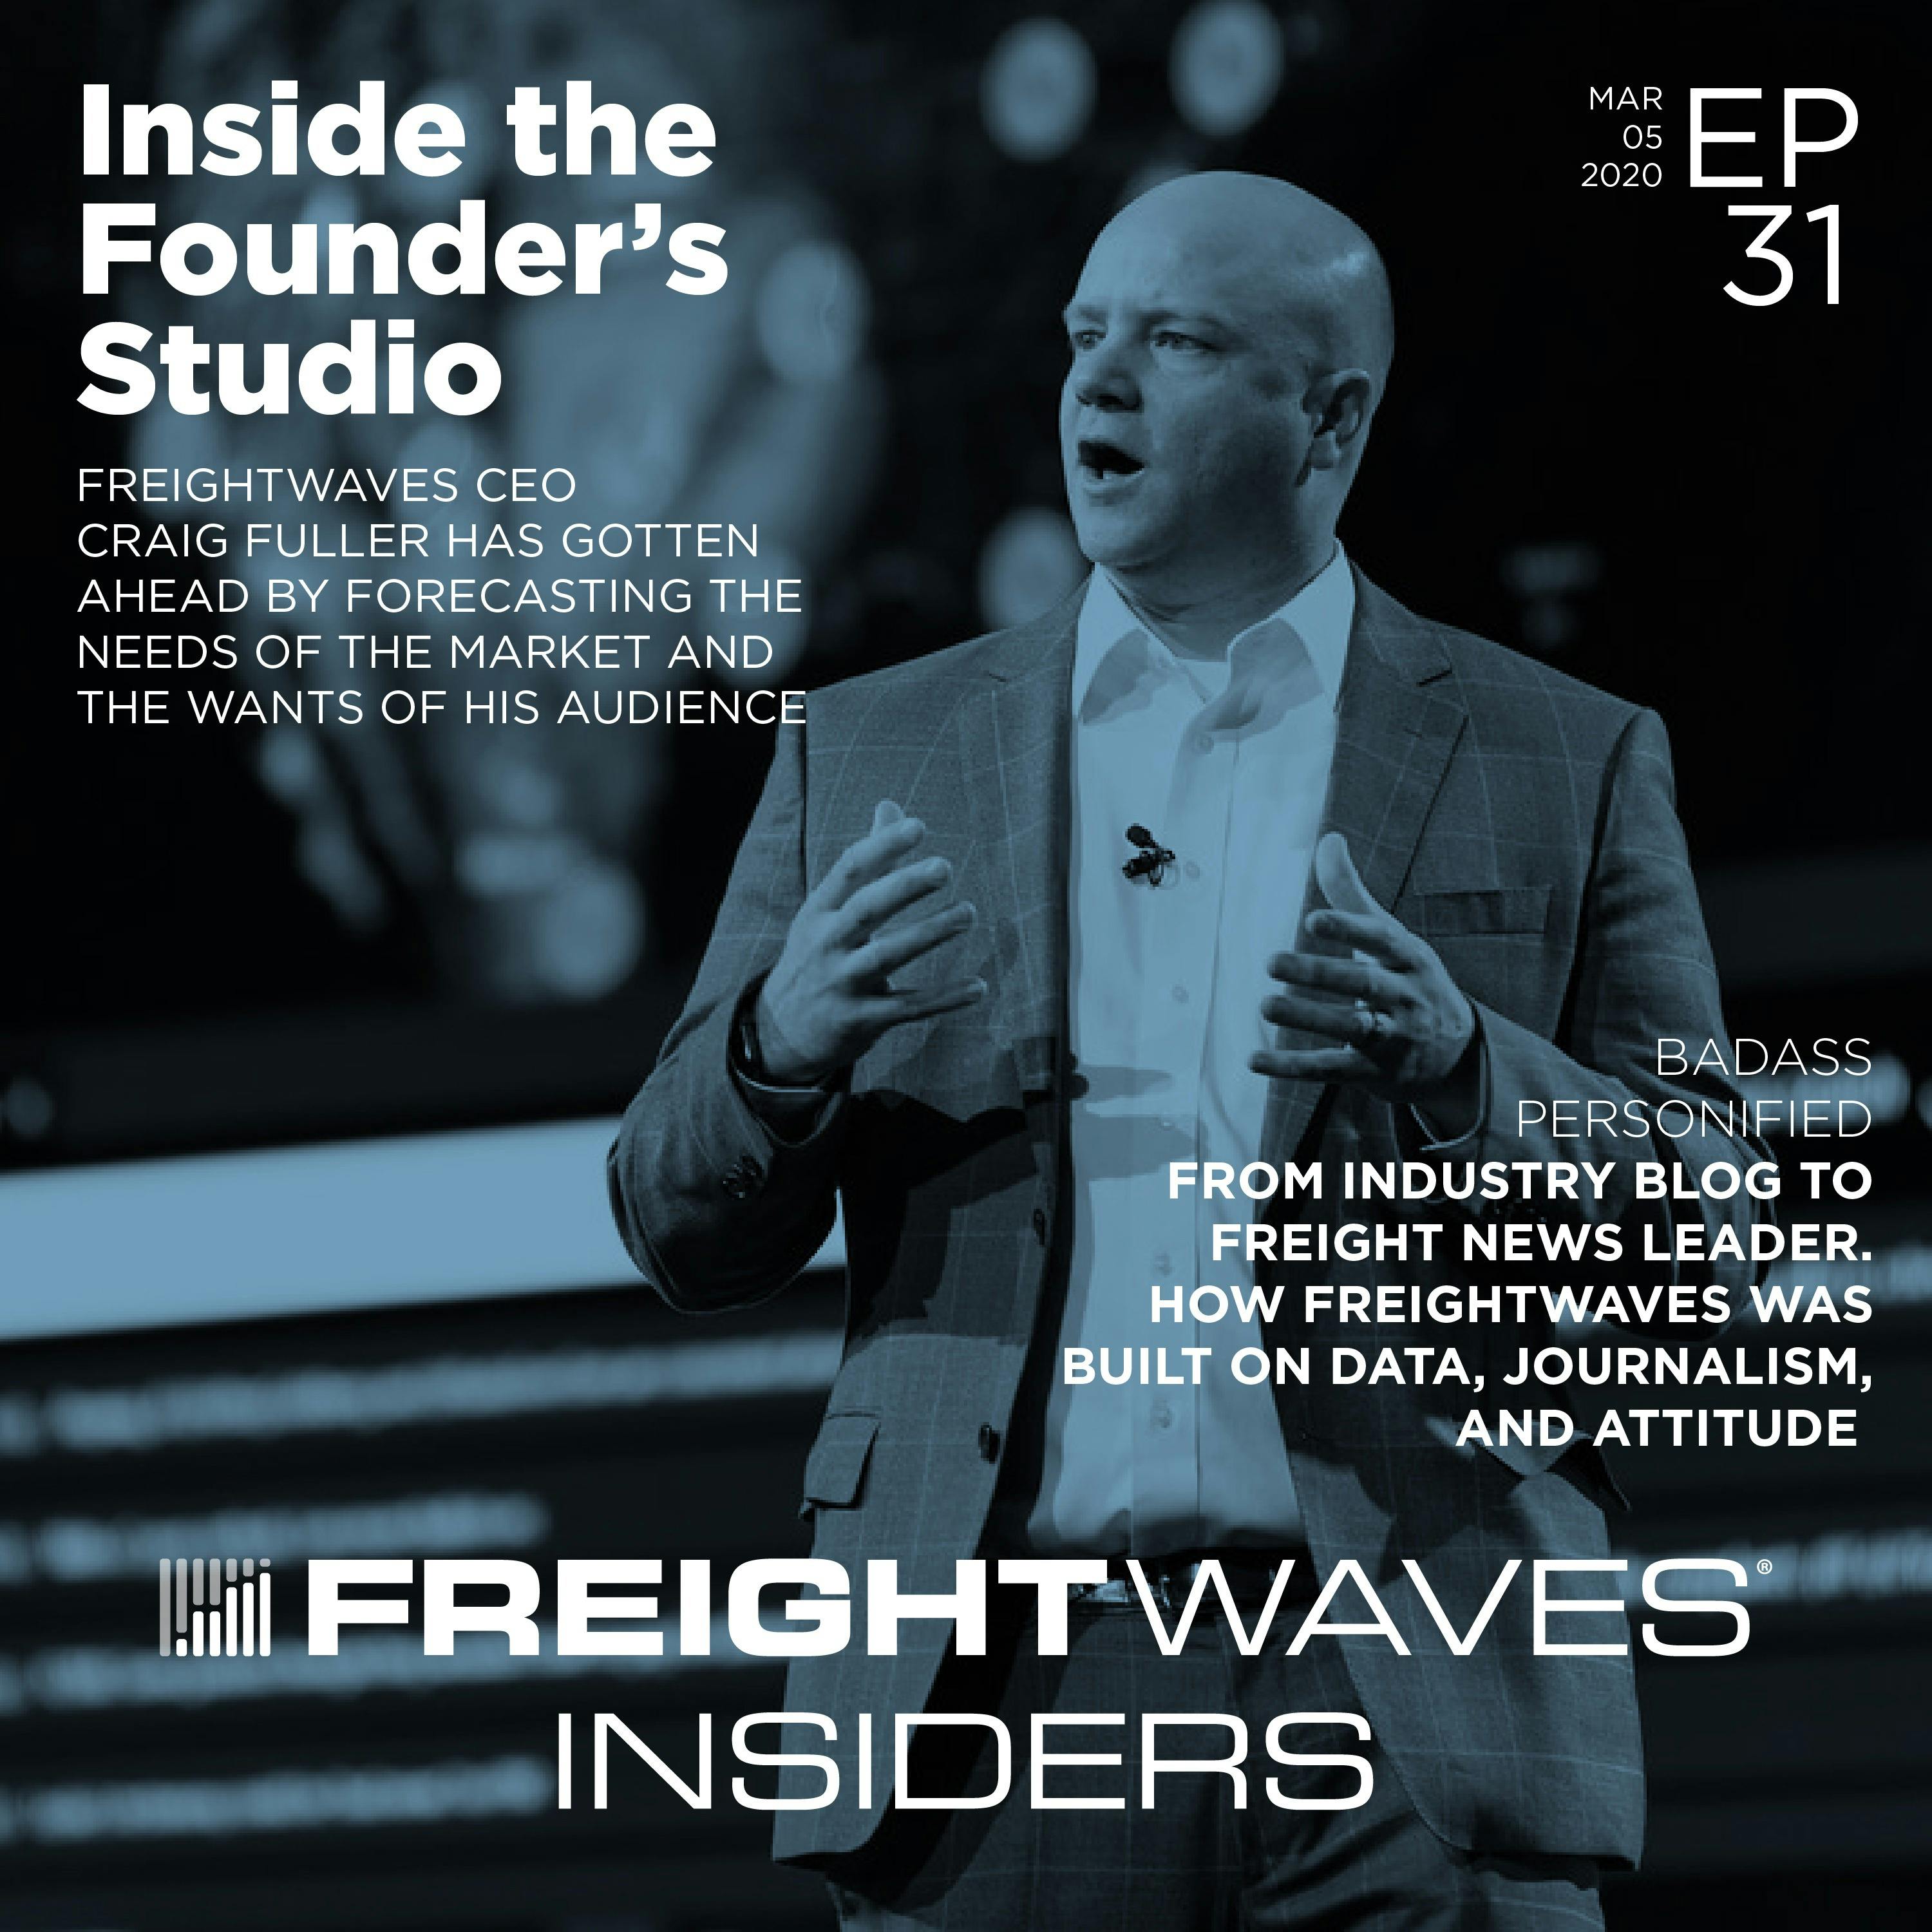 Inside the founder's studio with FreightWaves CEO and founder Craig Fuller